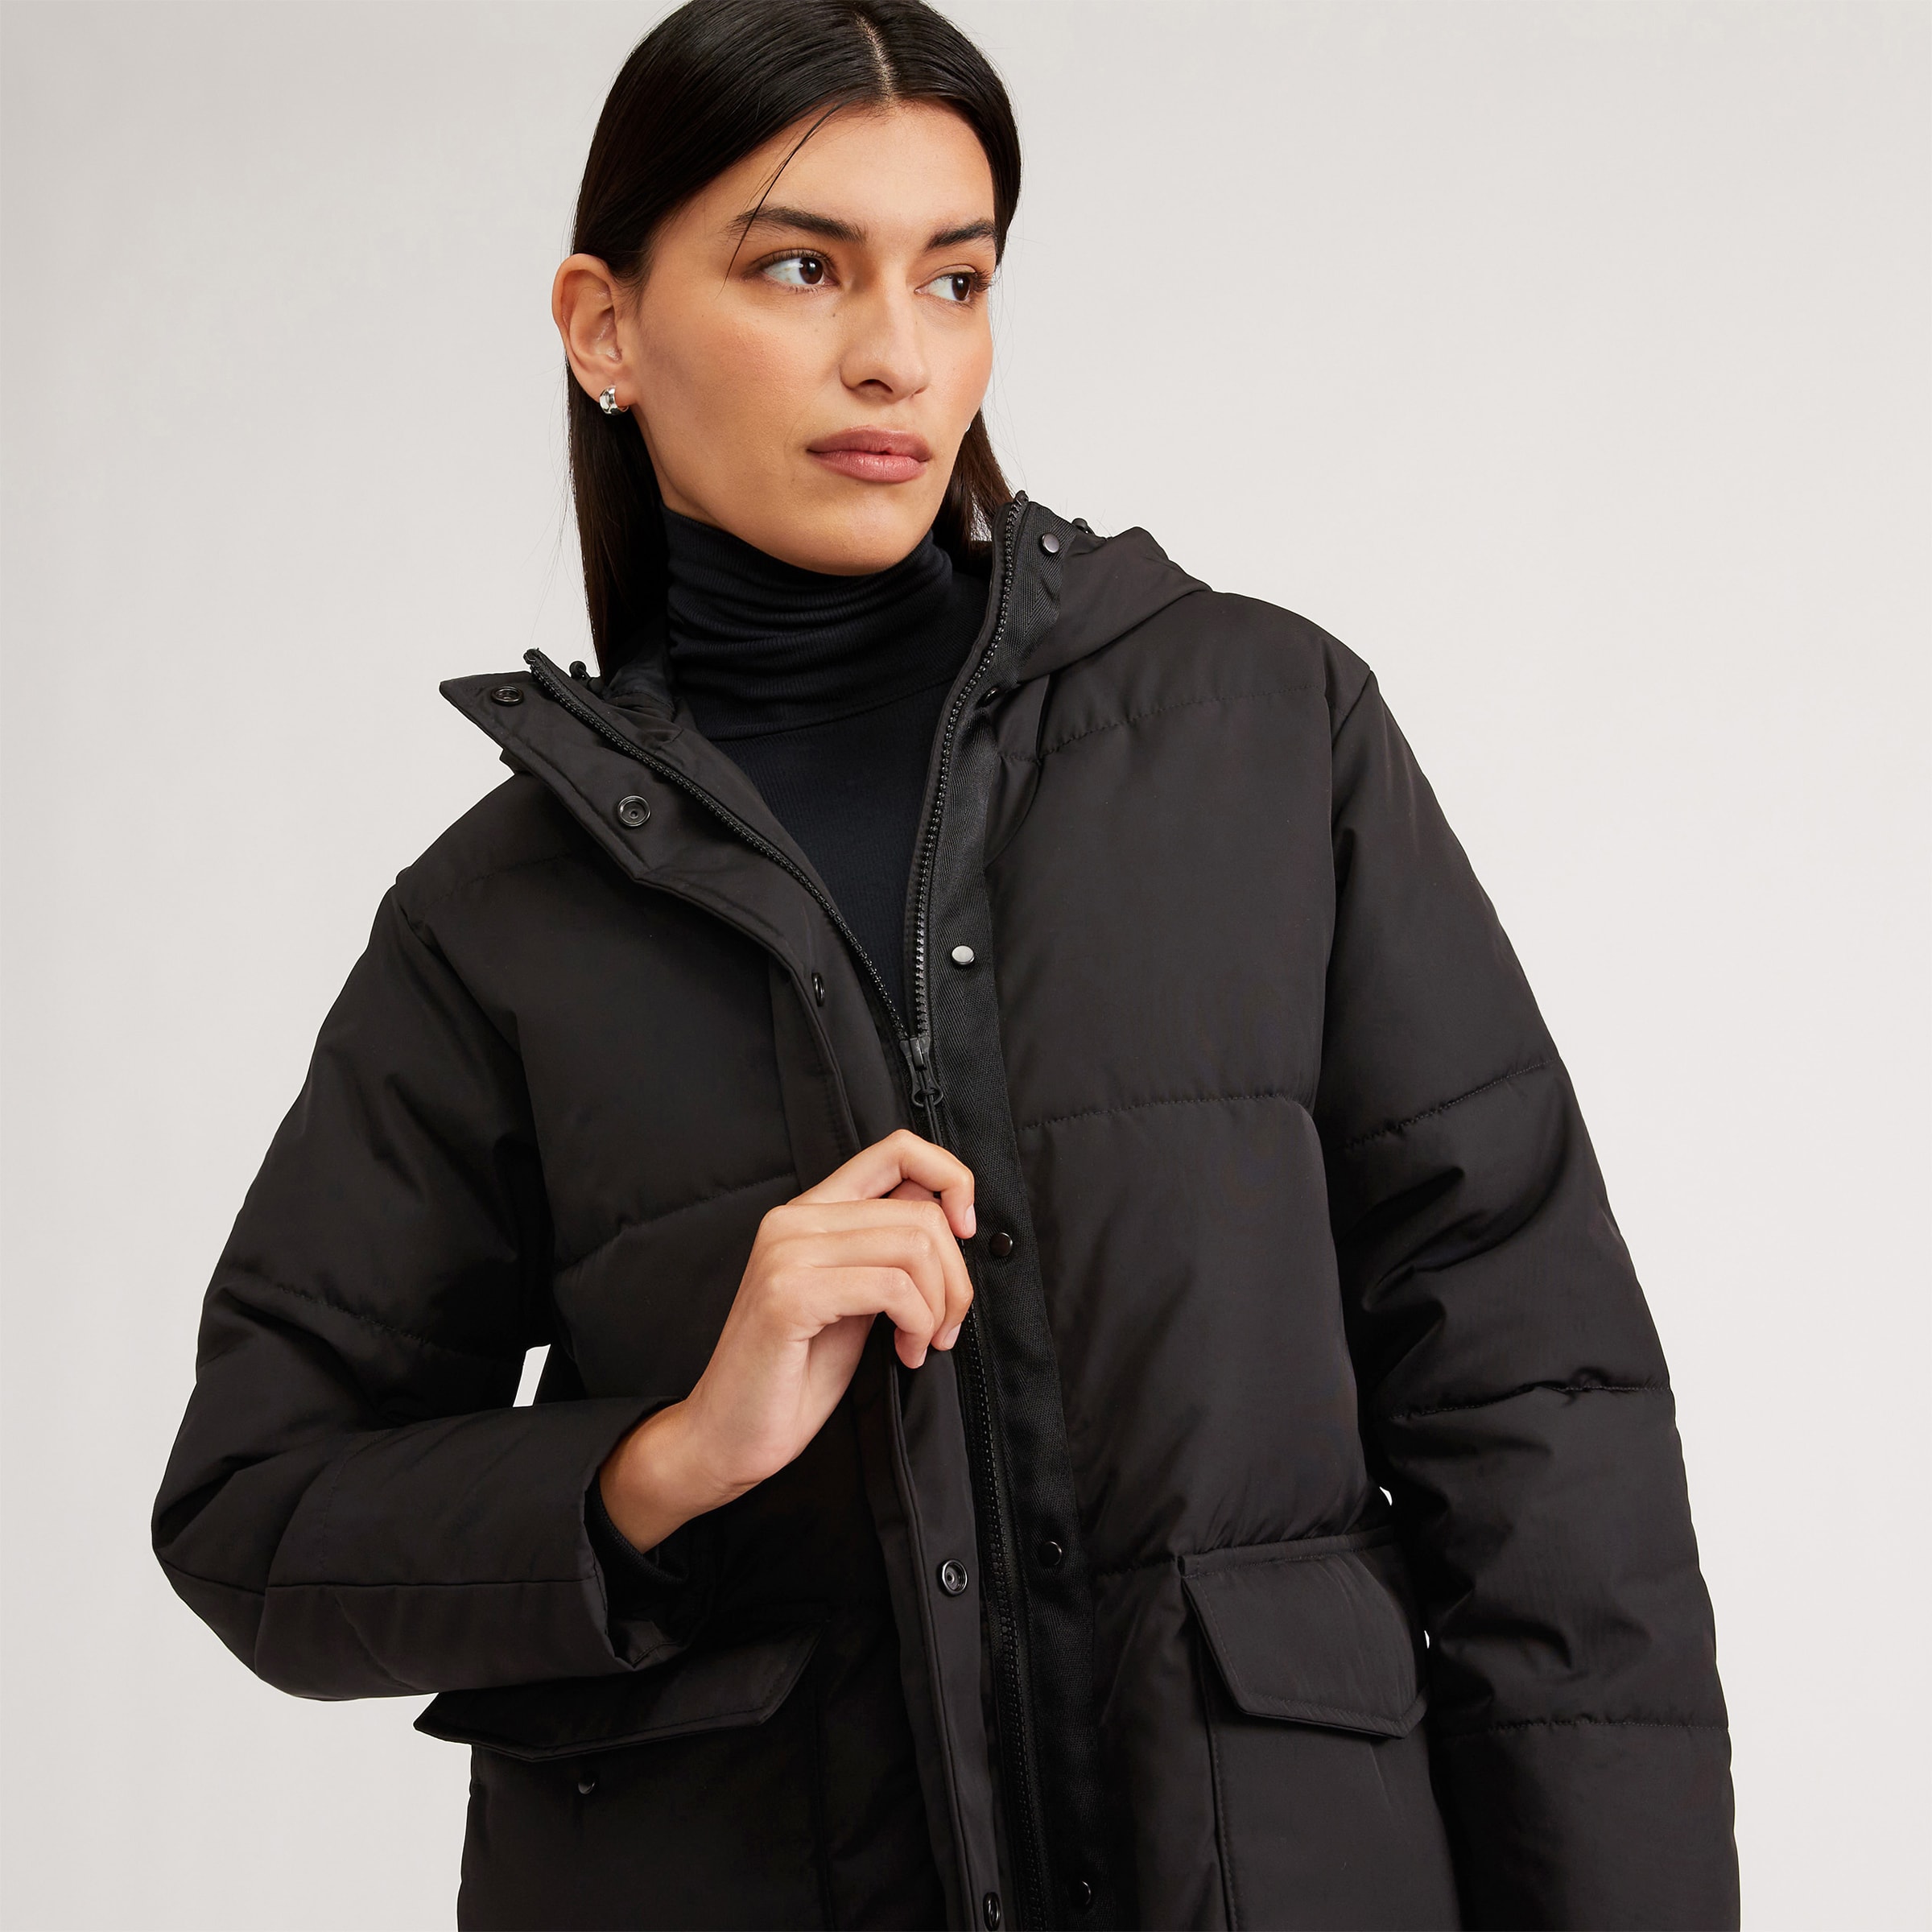 Everlane Winter Coat Collection Review - an indigo day